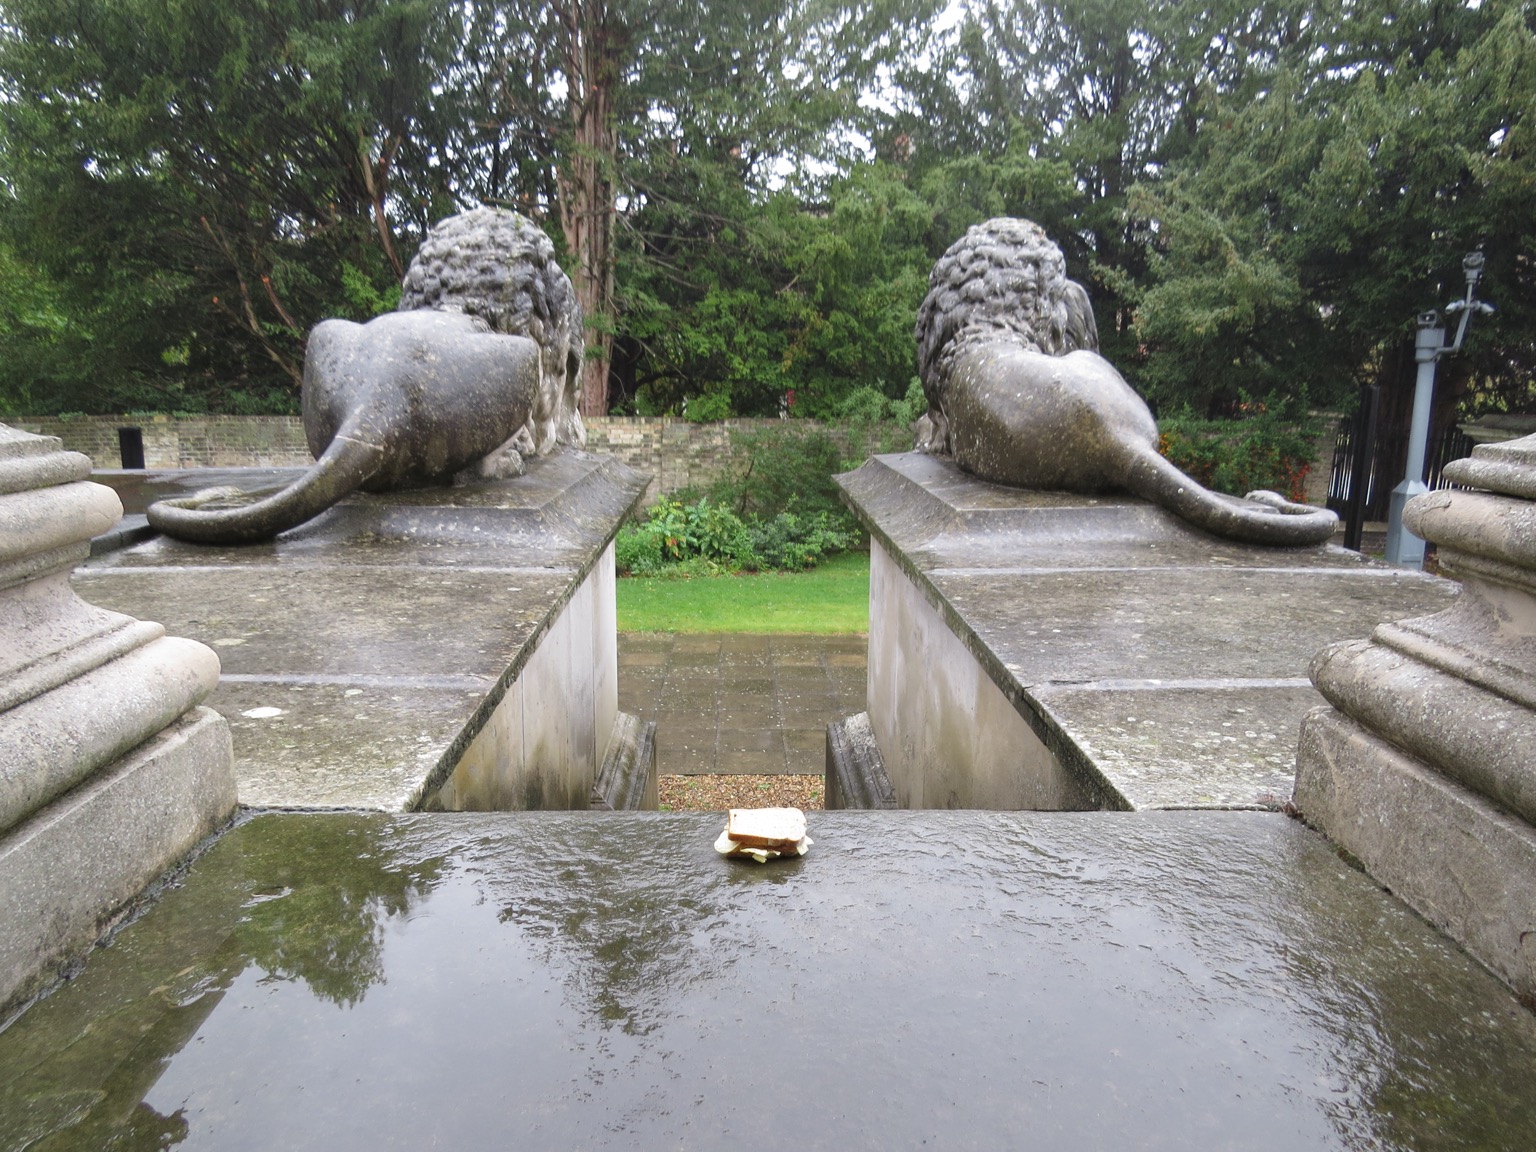 Crisp sandwich on the ground in front of two lion statues